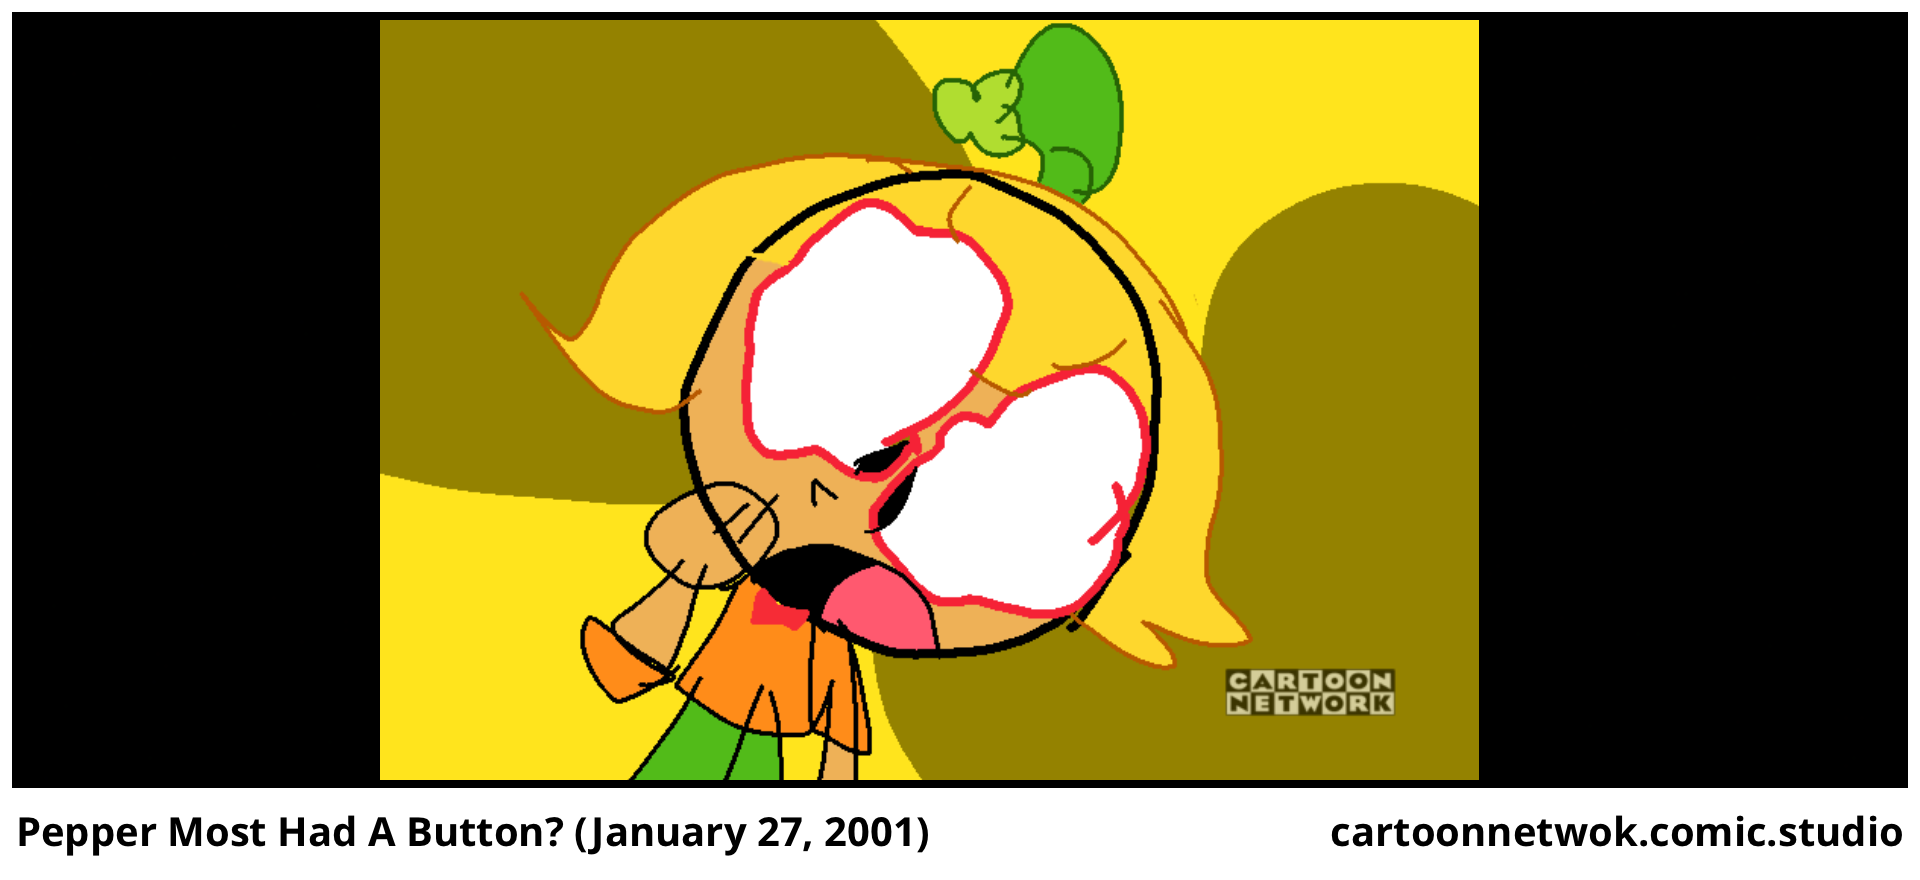 Pepper Most Had A Button? (January 27, 2001)